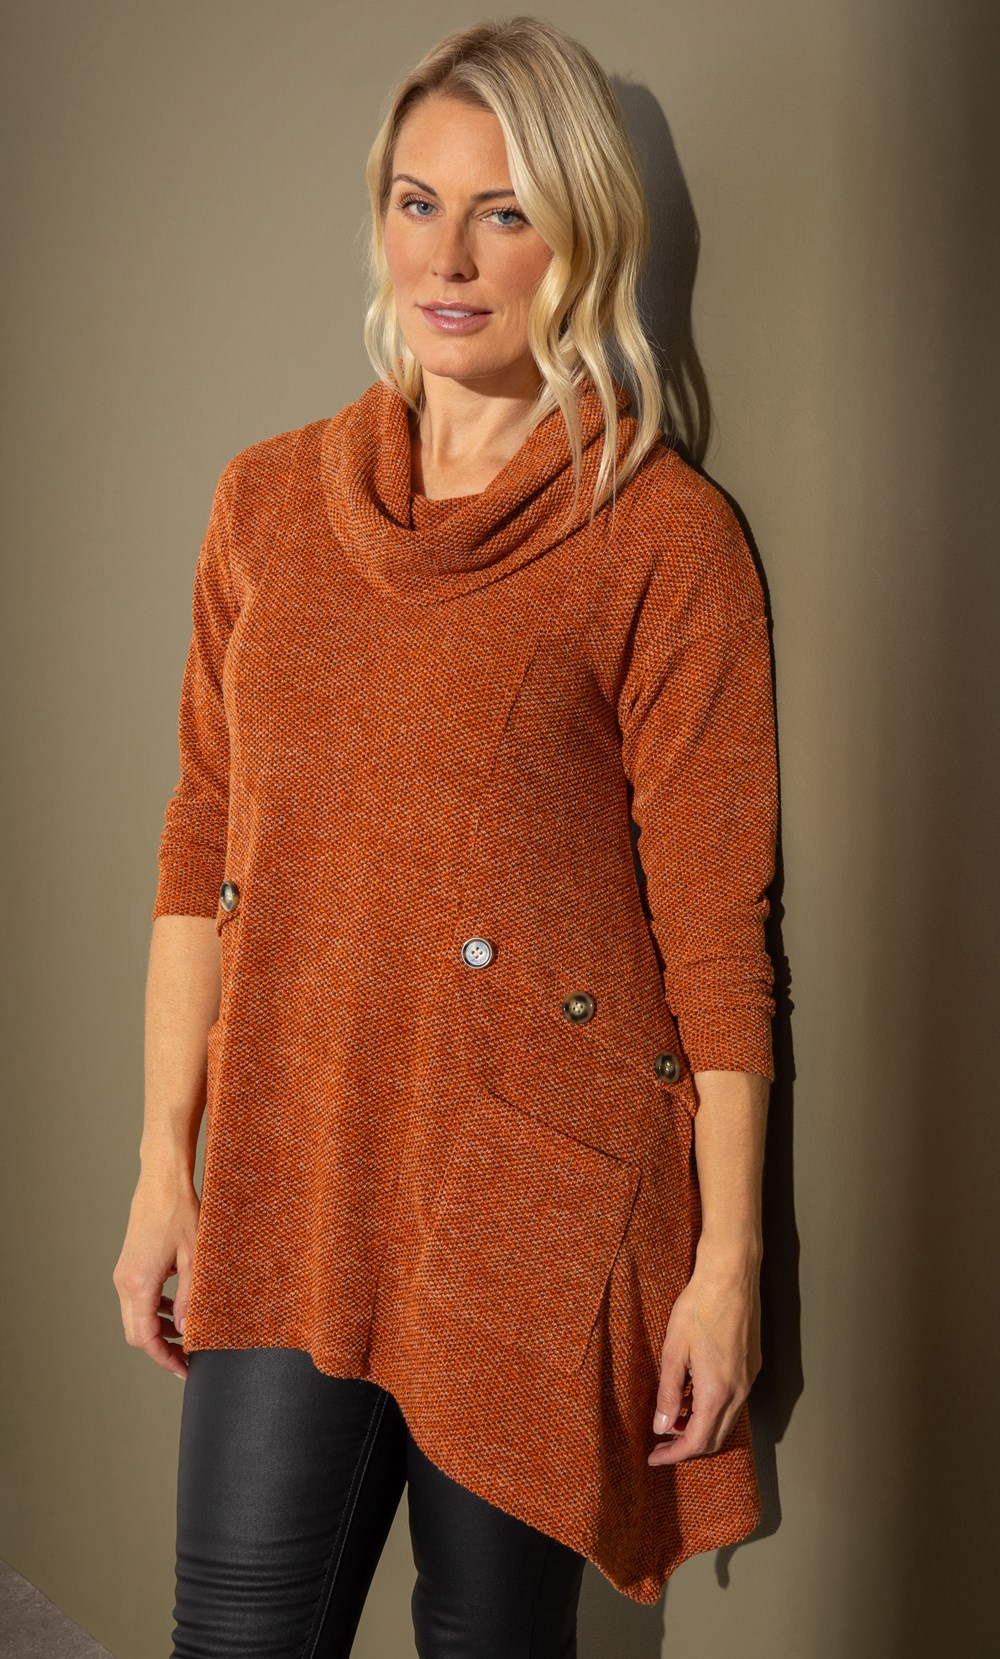 Brands - Klass Relaxed Fit Knitted Tunic Top Orange Women’s